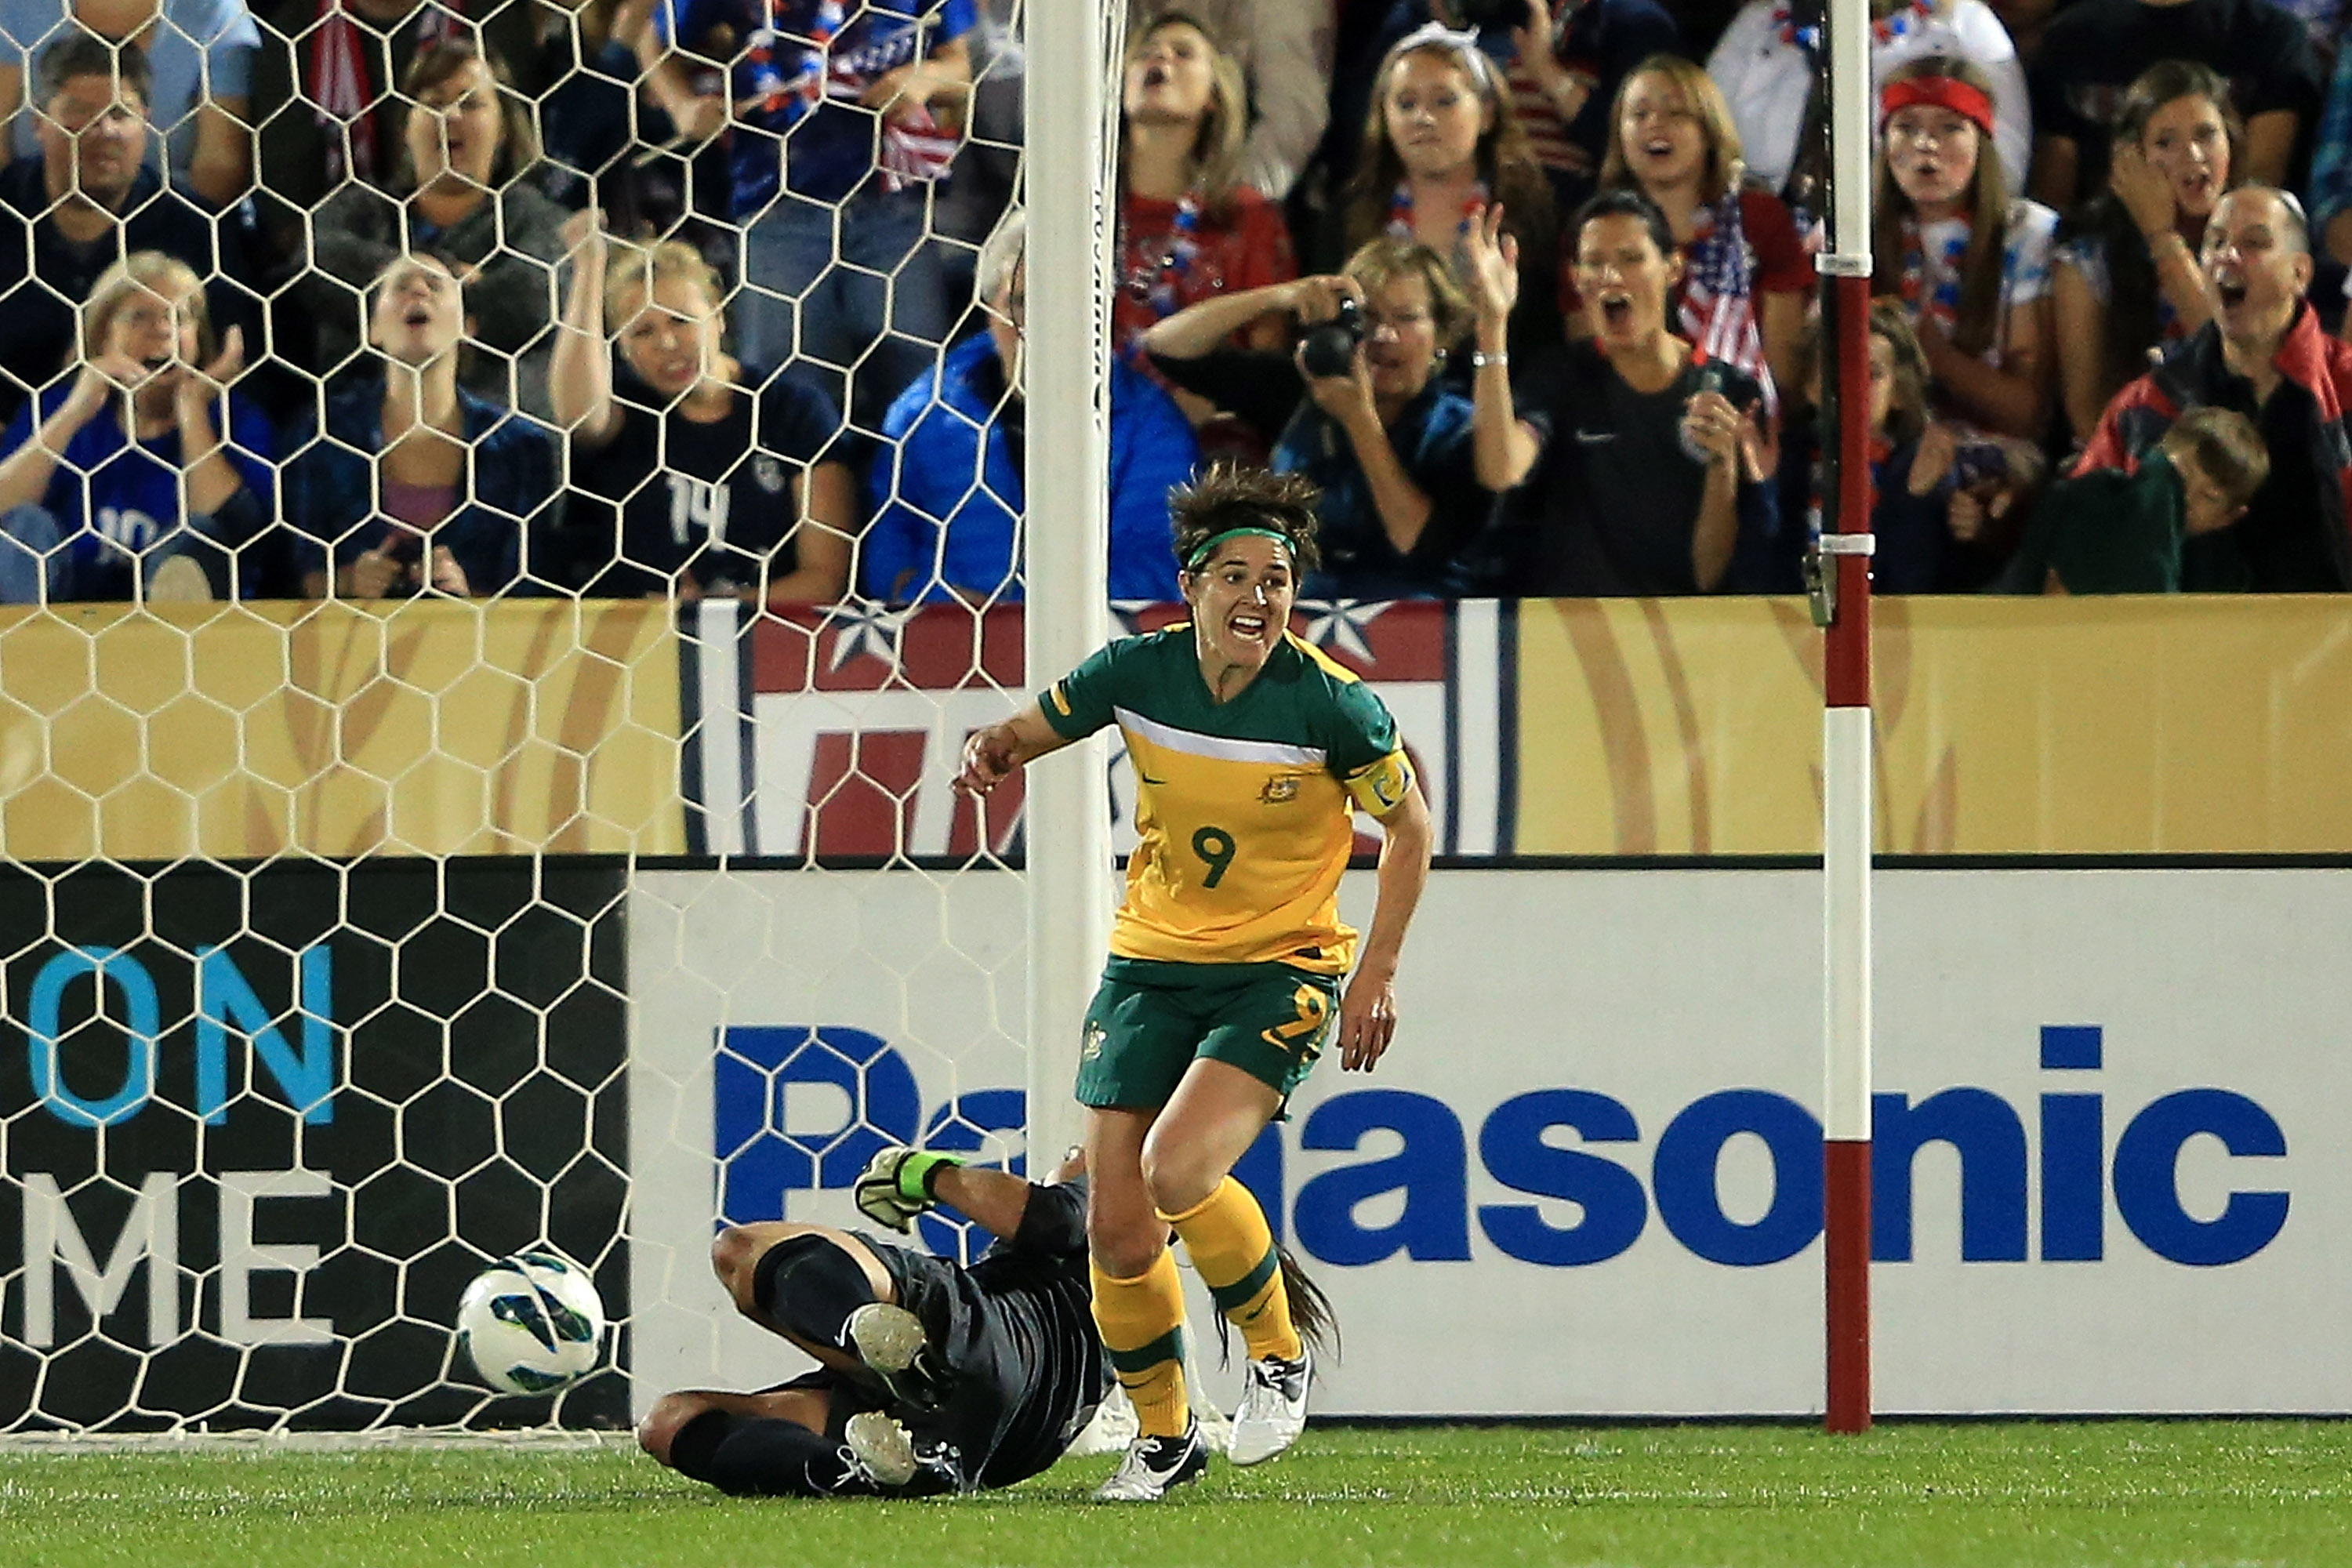 Walsh scored against the United States in her final game as a Westfield Matilda in 2012